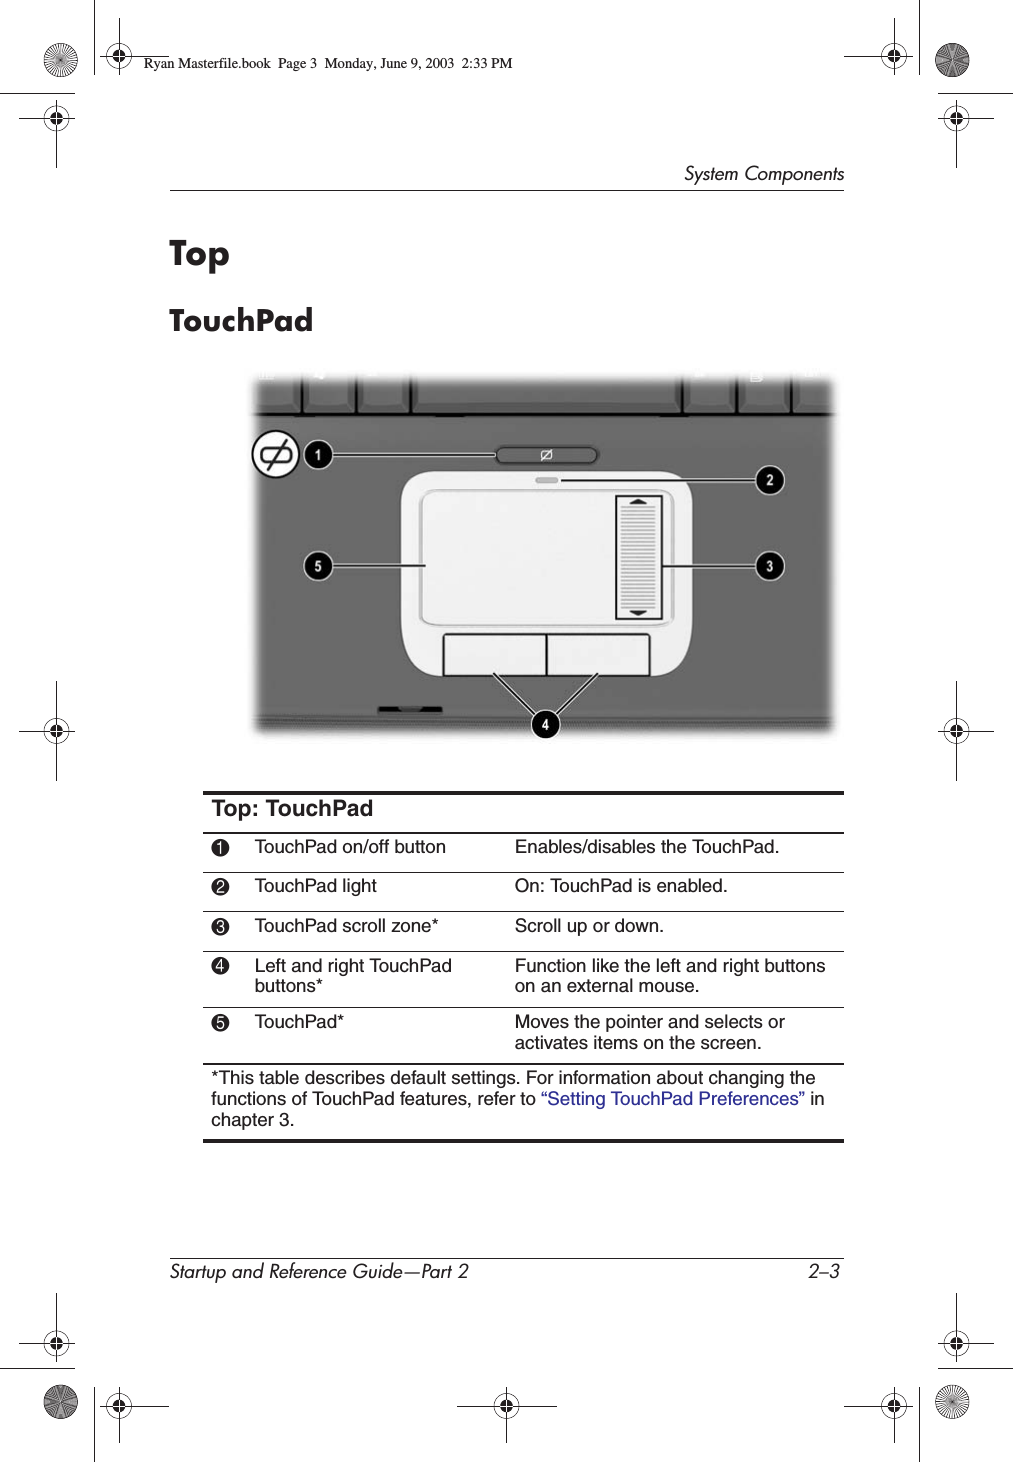 System ComponentsStartup and Reference Guide—Part 2 2–3TopTouchPadTop: TouchPad1TouchPad on/off button Enables/disables the TouchPad.2TouchPad light On: TouchPad is enabled.3TouchPad scroll zone* Scroll up or down.4Left and right TouchPad buttons*Function like the left and right buttons on an external mouse.5TouchPad* Moves the pointer and selects or activates items on the screen.*This table describes default settings. For information about changing the functions of TouchPad features, refer to “Setting TouchPad Preferences” inchapter 3.Ryan Masterfile.book  Page 3  Monday, June 9, 2003  2:33 PM